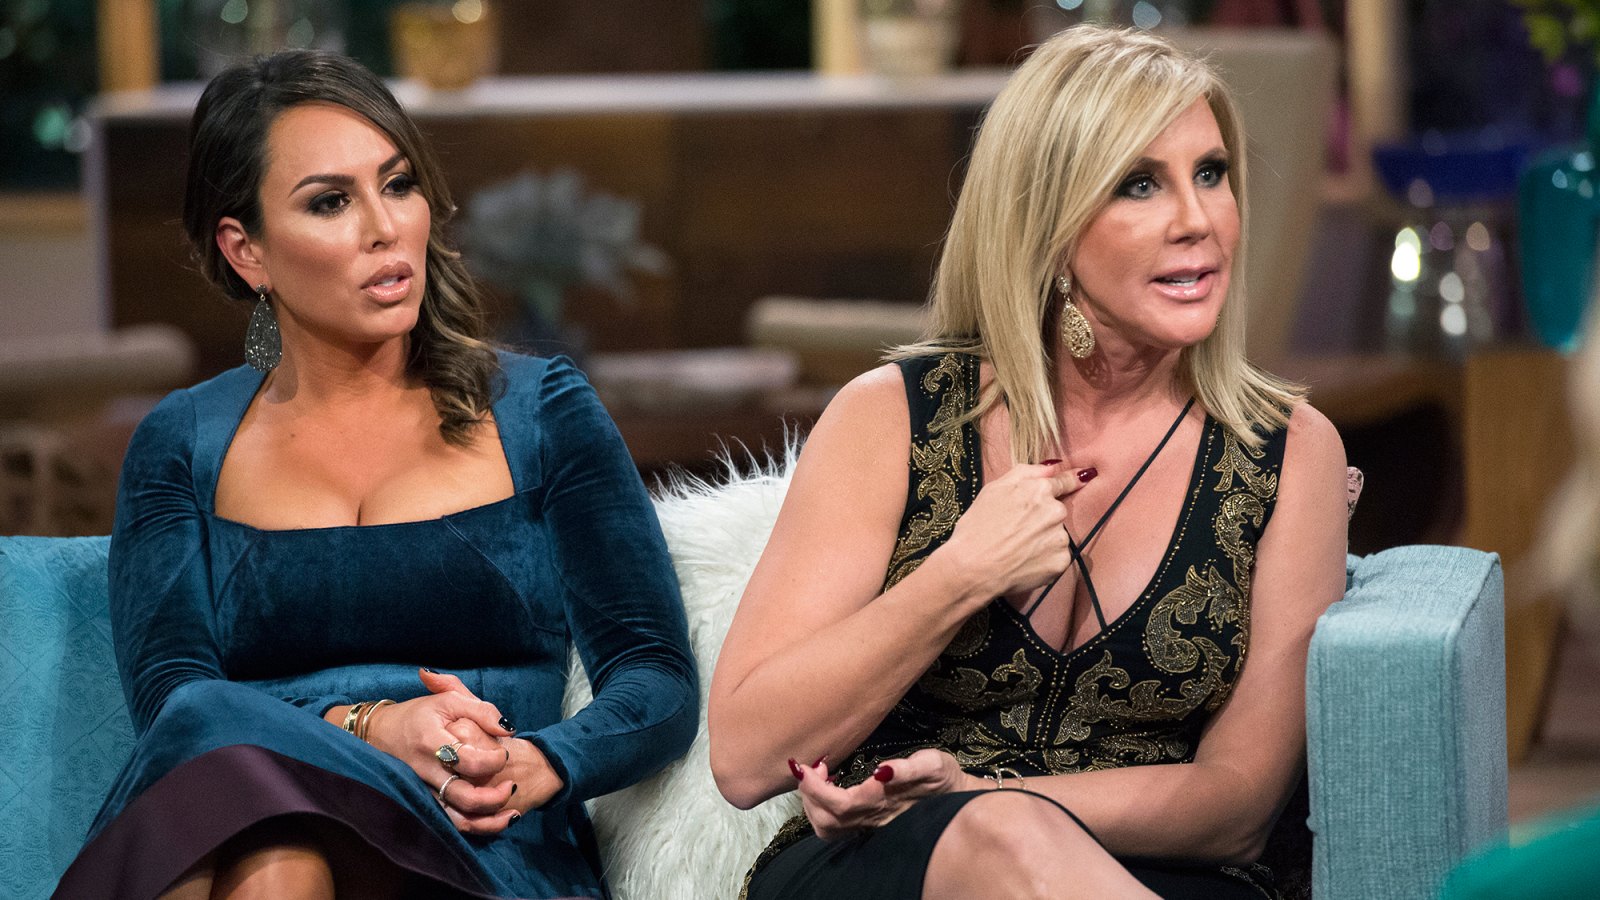 Kelly Dodd Says She Won’t Return to ‘RHOC’ With Vicki Gunvalson After Cocaine Allegations: ‘I’m Out’